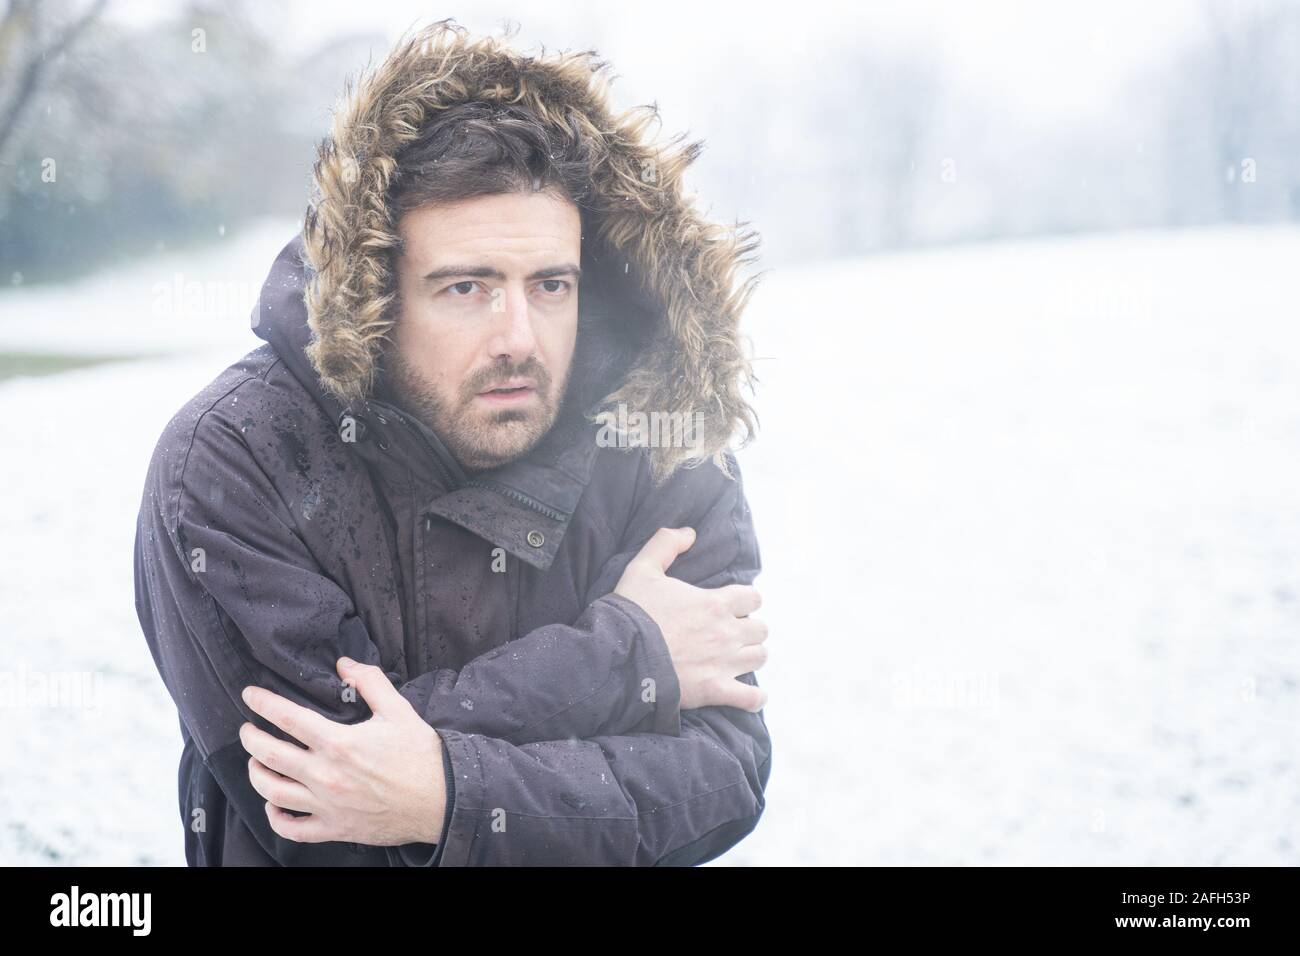 Man wearing warm clothes freezing in the snow Stock Photo